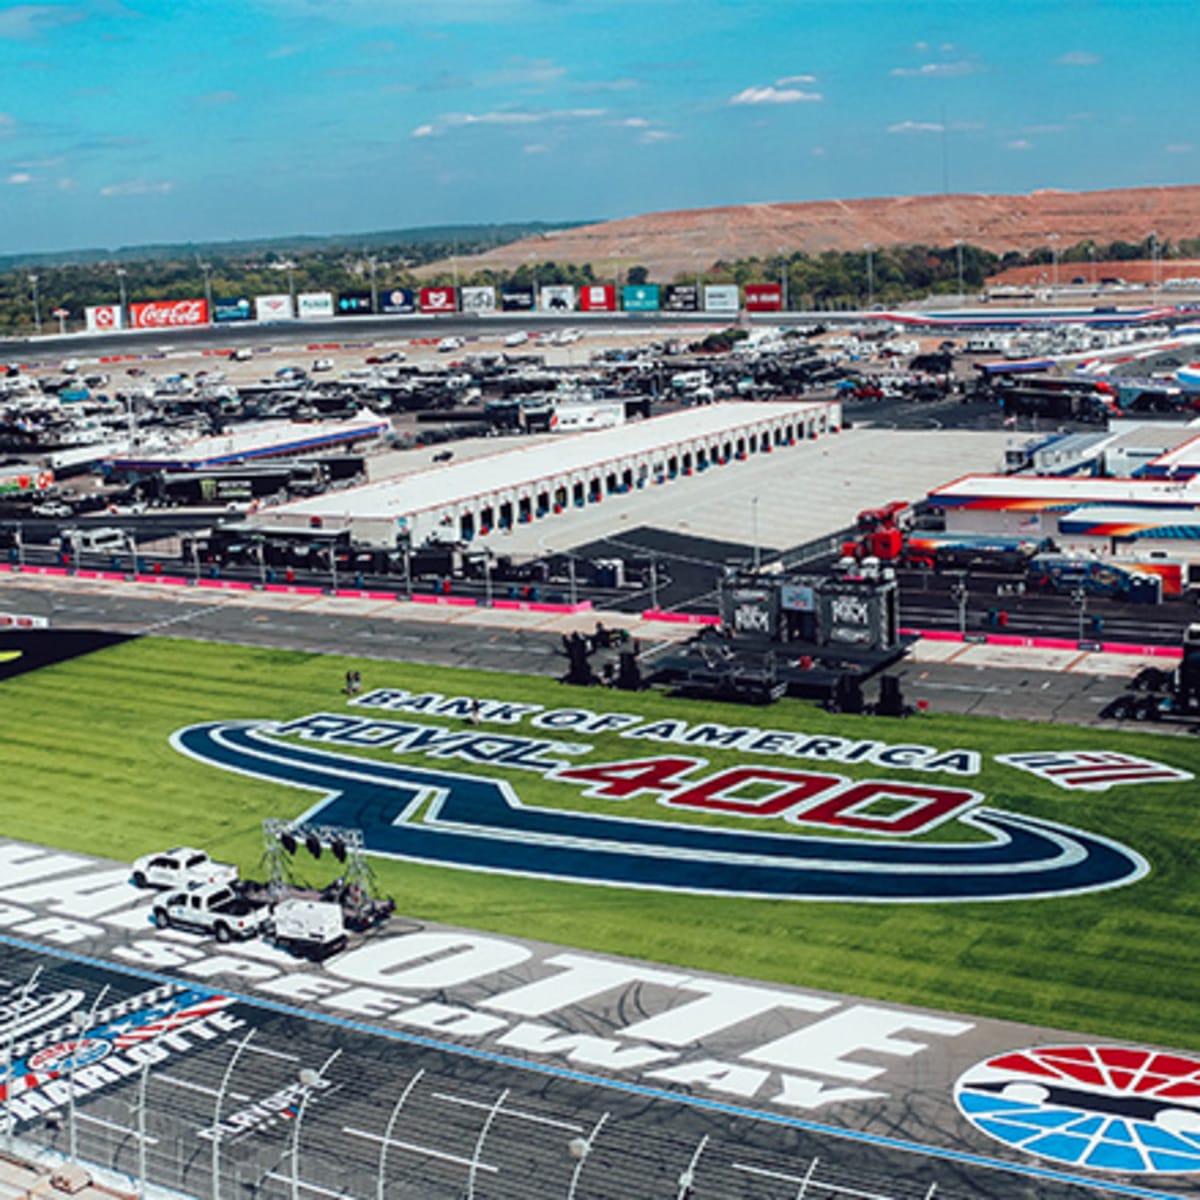 Bank of America ROVAL 400 (Charlotte) Preview and Fantasy Predictions